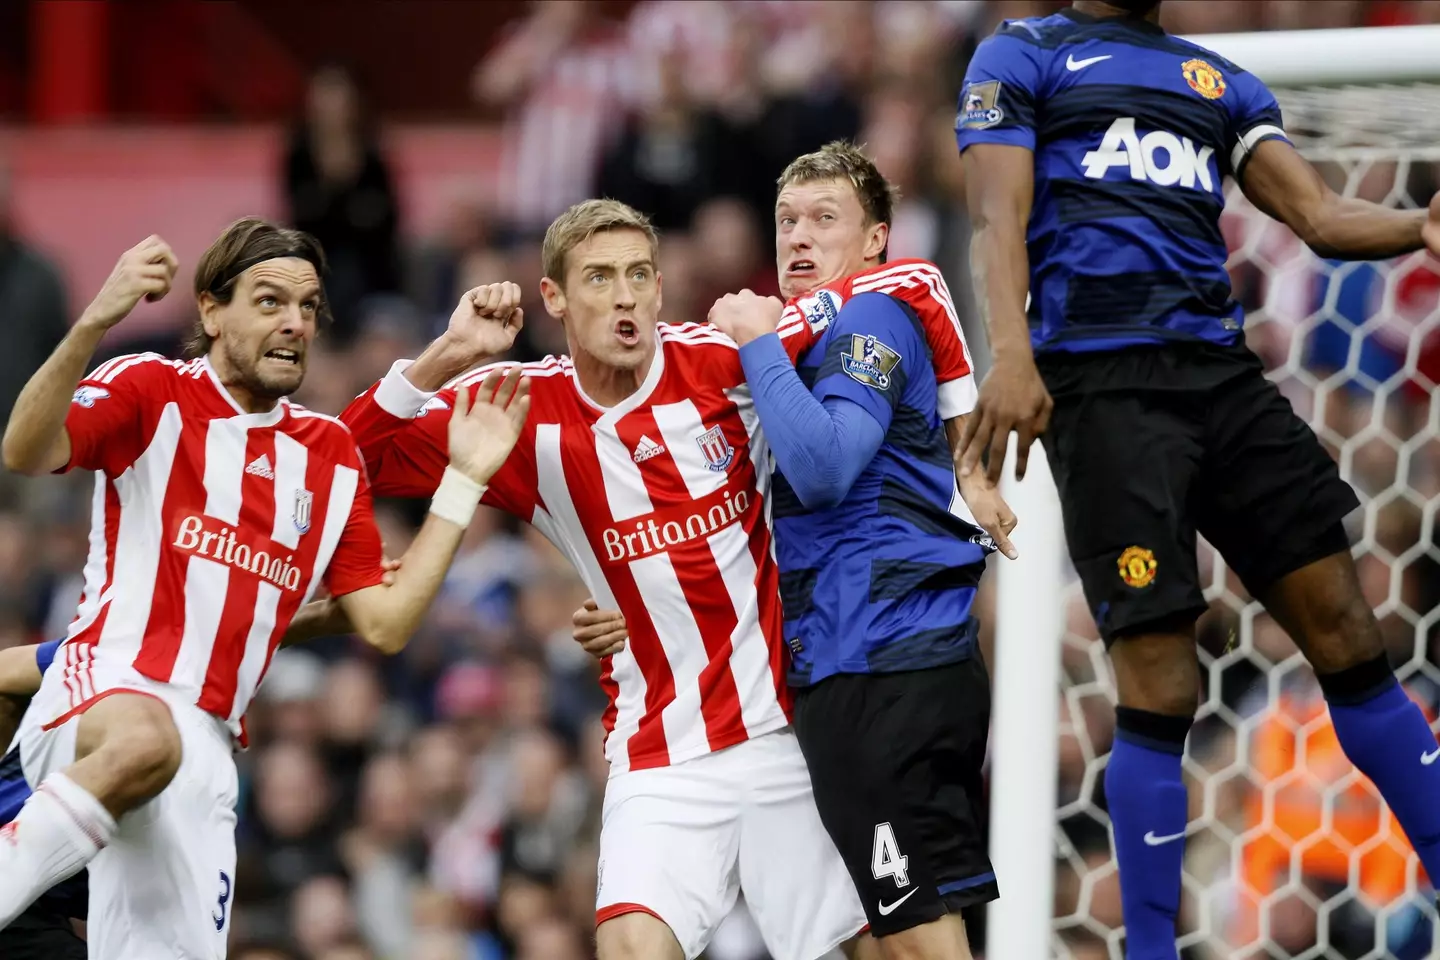 Crouch in action against Manchester United in 2011. (Image